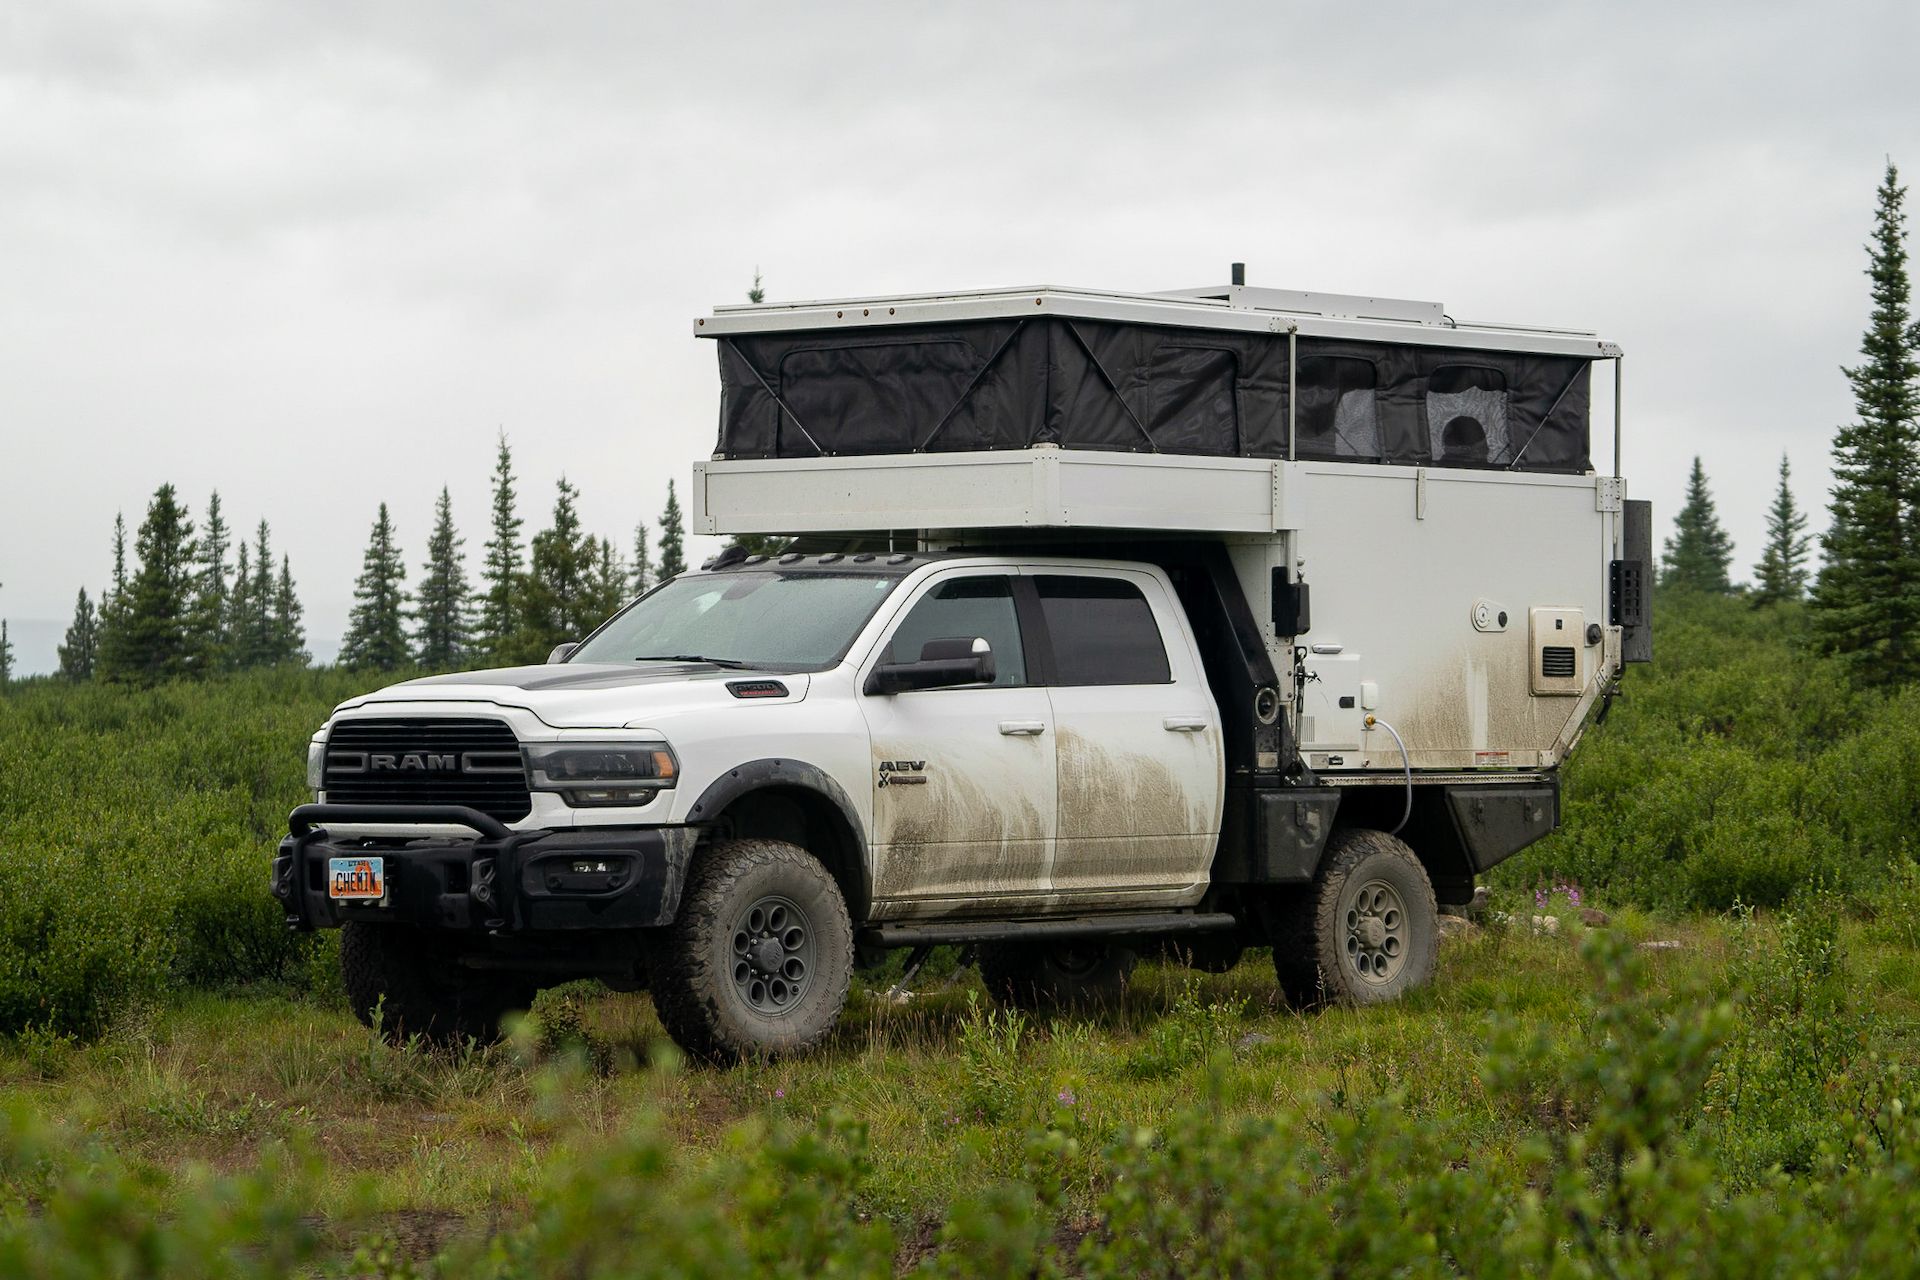 Although the road system is limited, we still had some great “off the beaten path” adventures with the truck and found great remote campsites.